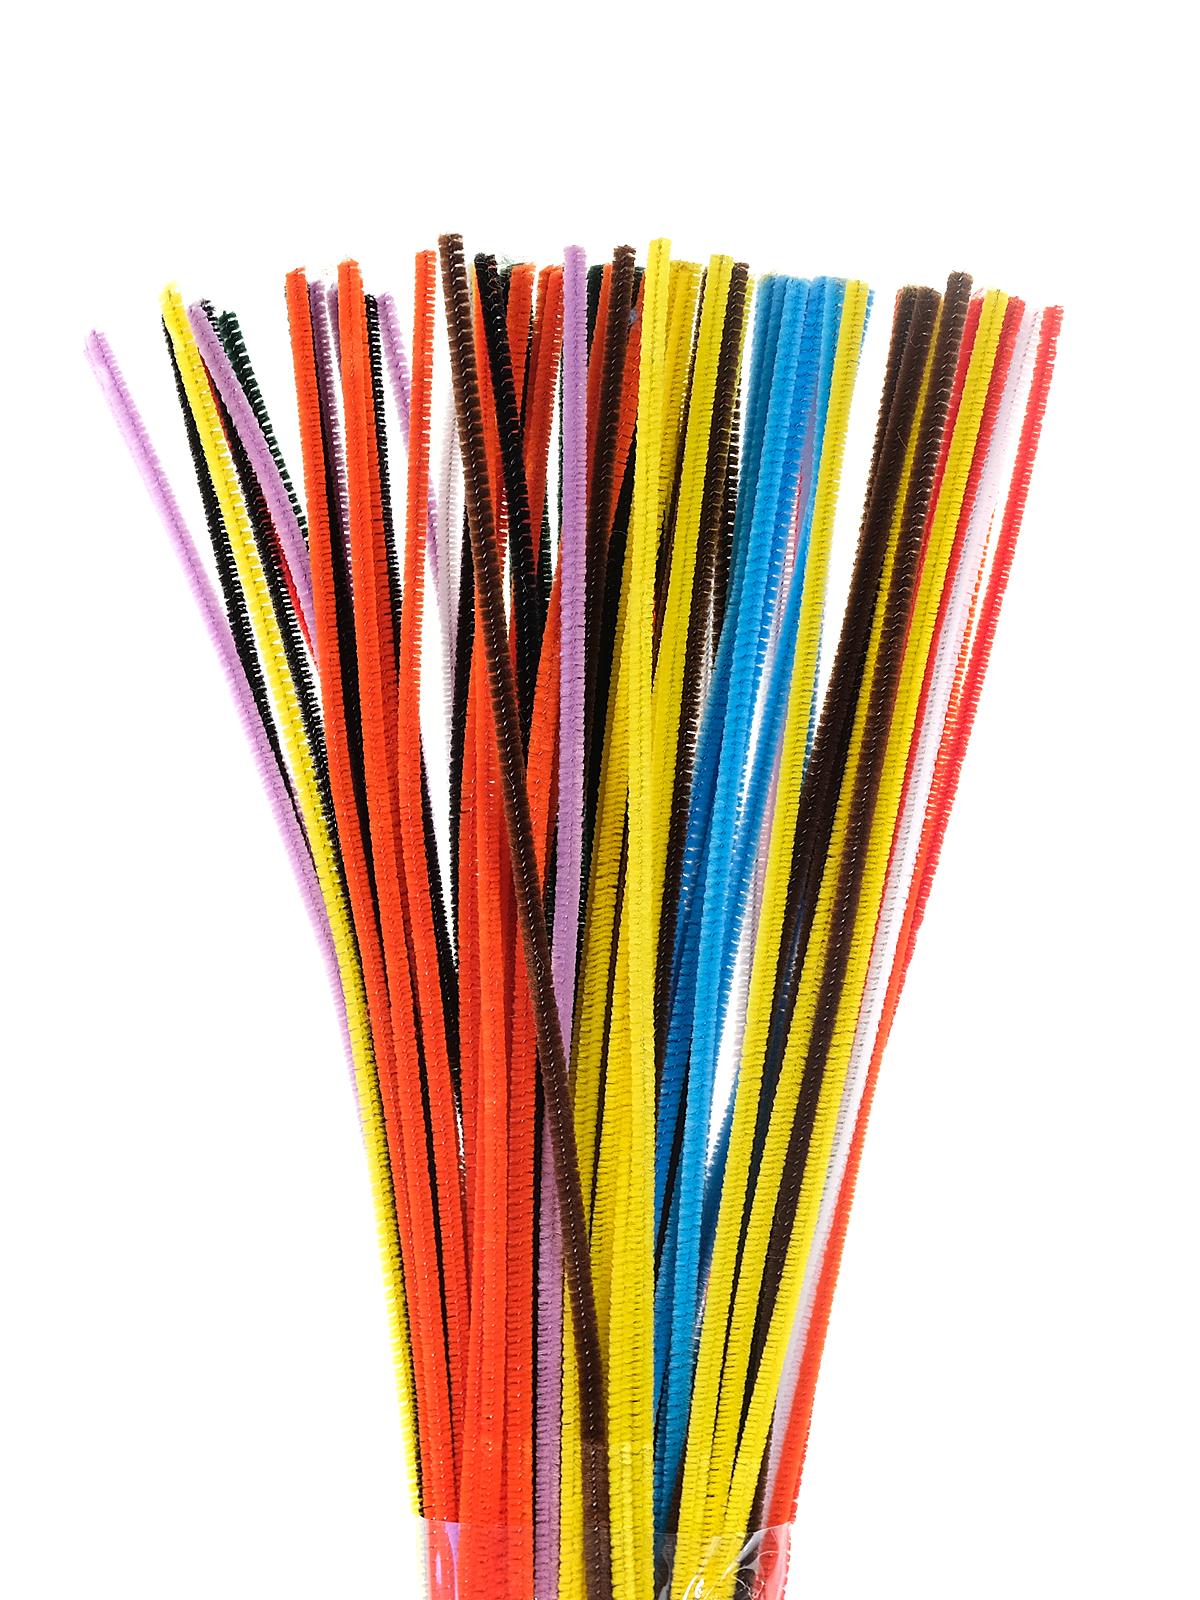 Chenille Stems 4 Mm X 12 In. 100 Pieces Assorted